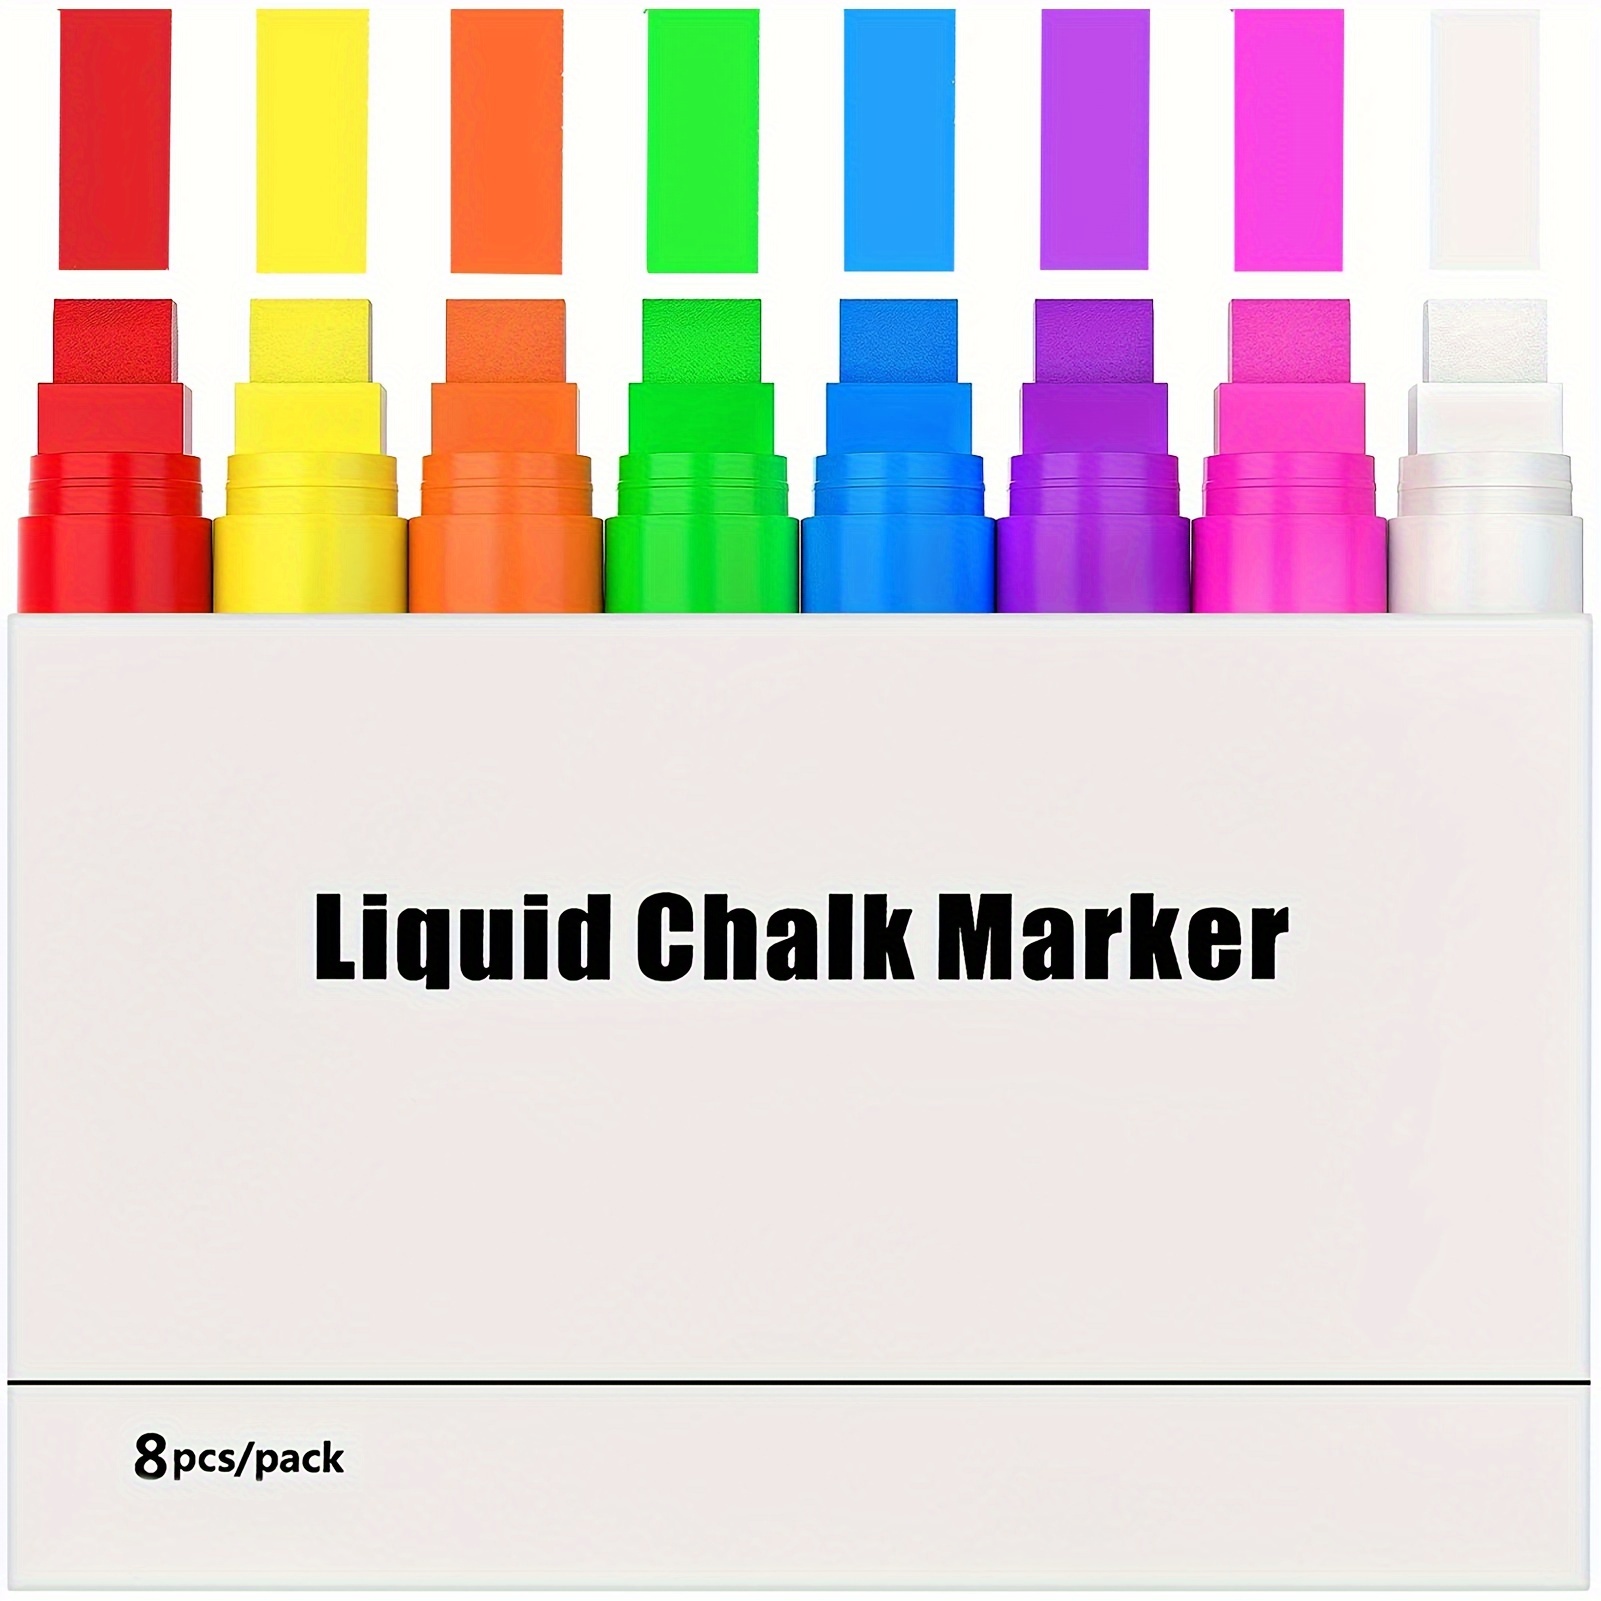 Window Chalk Markers for Cars Washable: 8 Colors Jumbo Liquid Chalk Marker  with 10mm Thick Tips, Big Chalkboard Markers, Car Window Paint Markers Pen